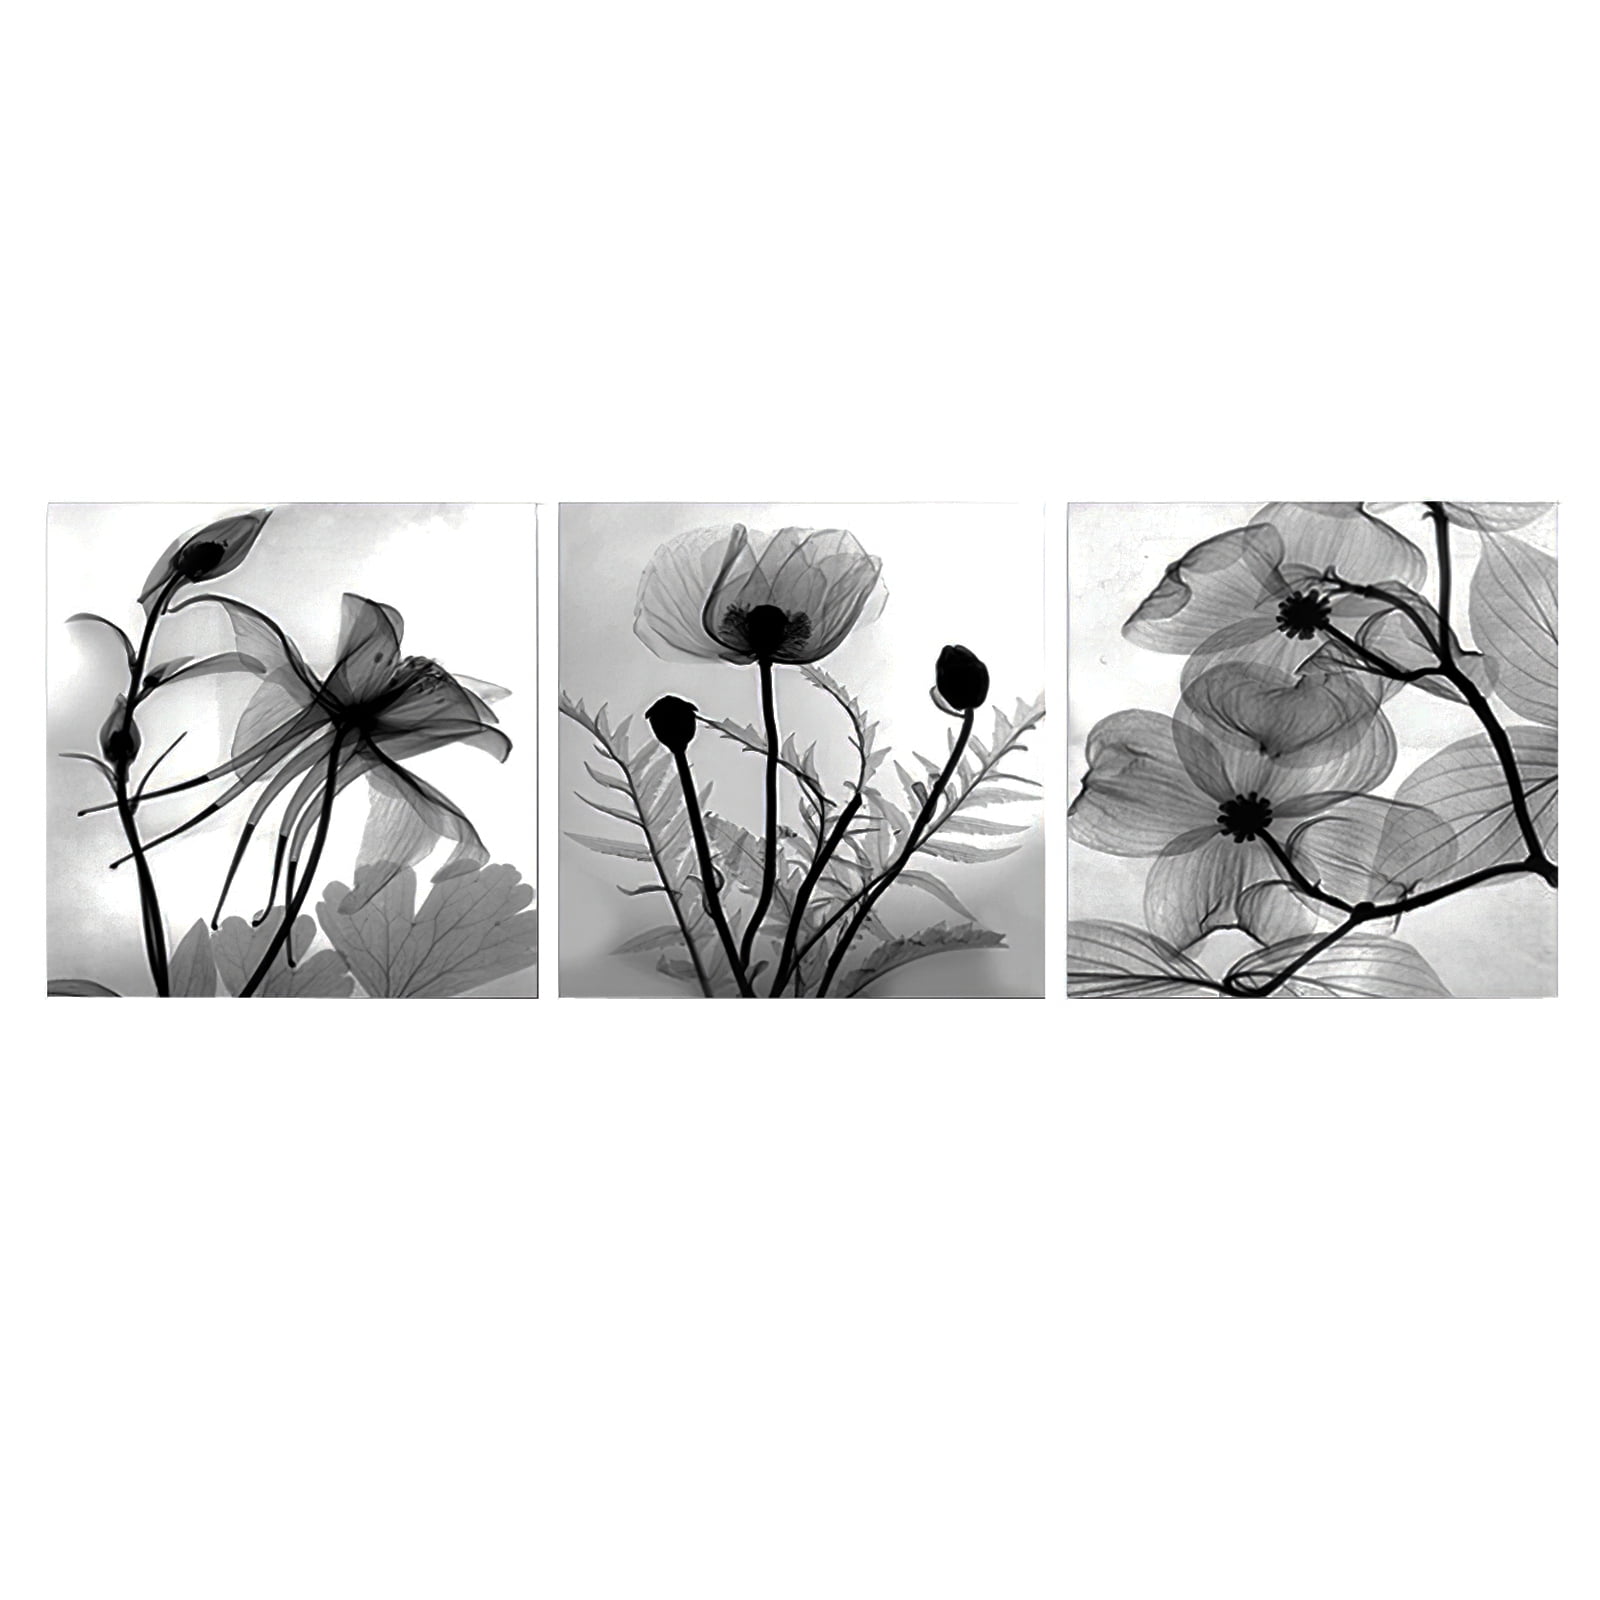 Landscape Art Black and White Modern Farmhouse Large Triptych Set of 3 Wall Art Prints or Canvases